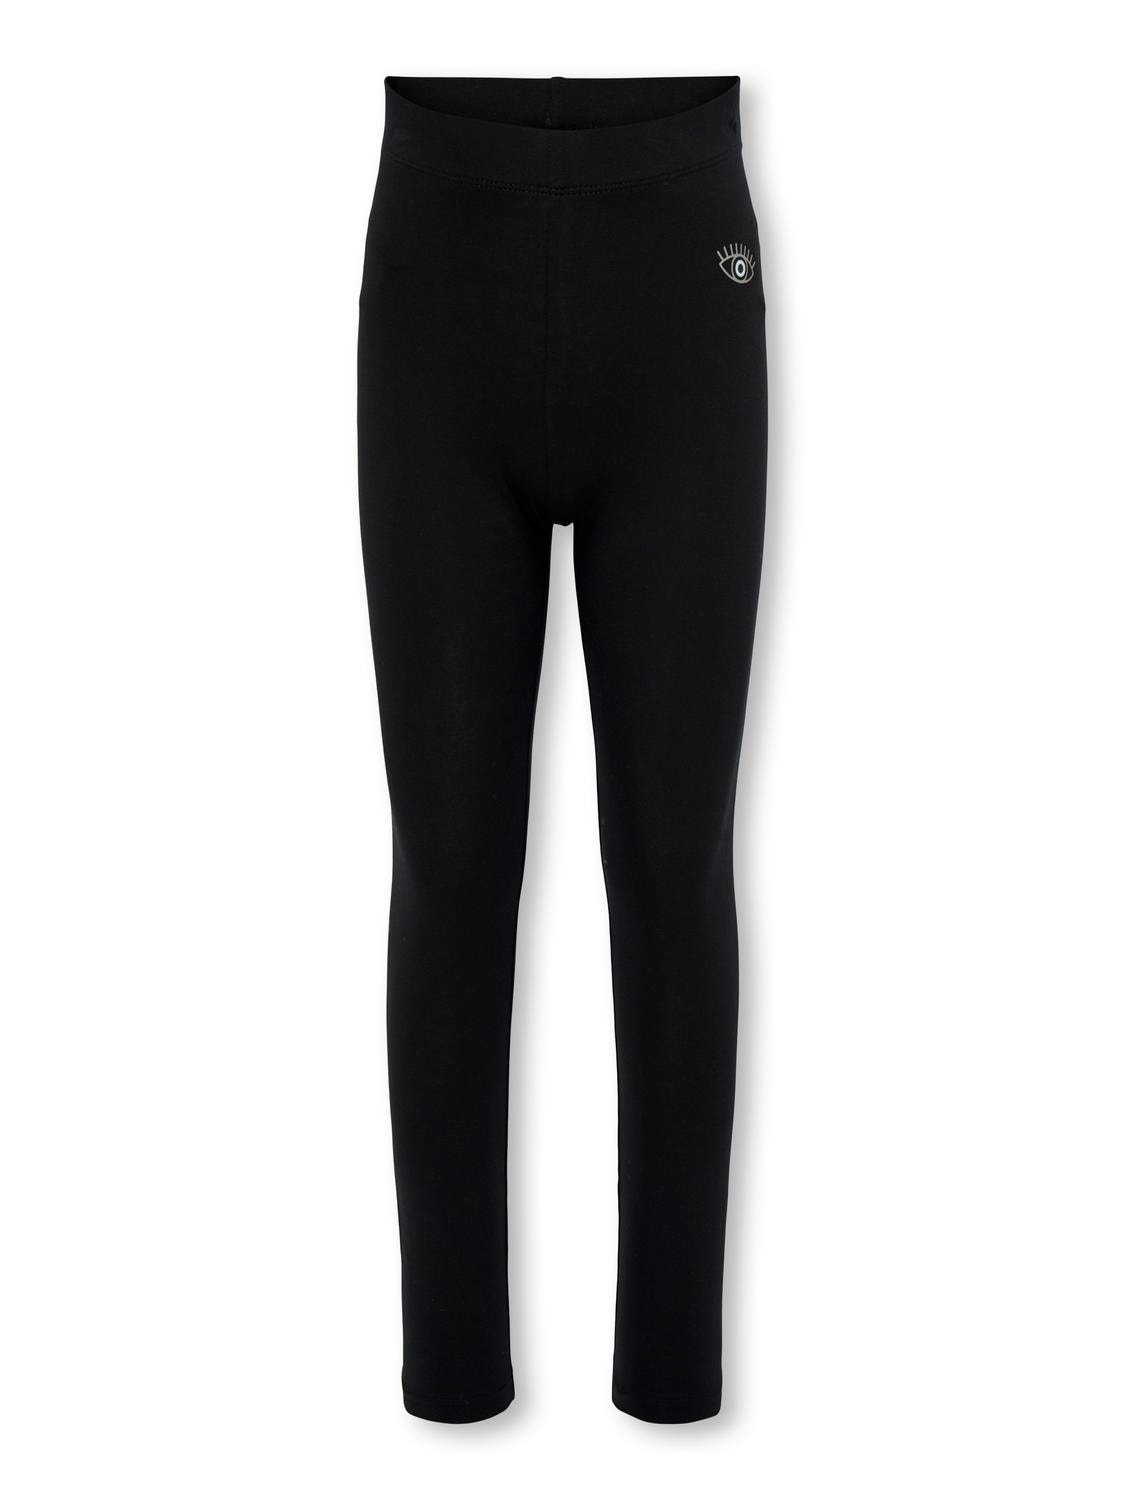 ONLY Tight Fit Leggings -Black - 15303591